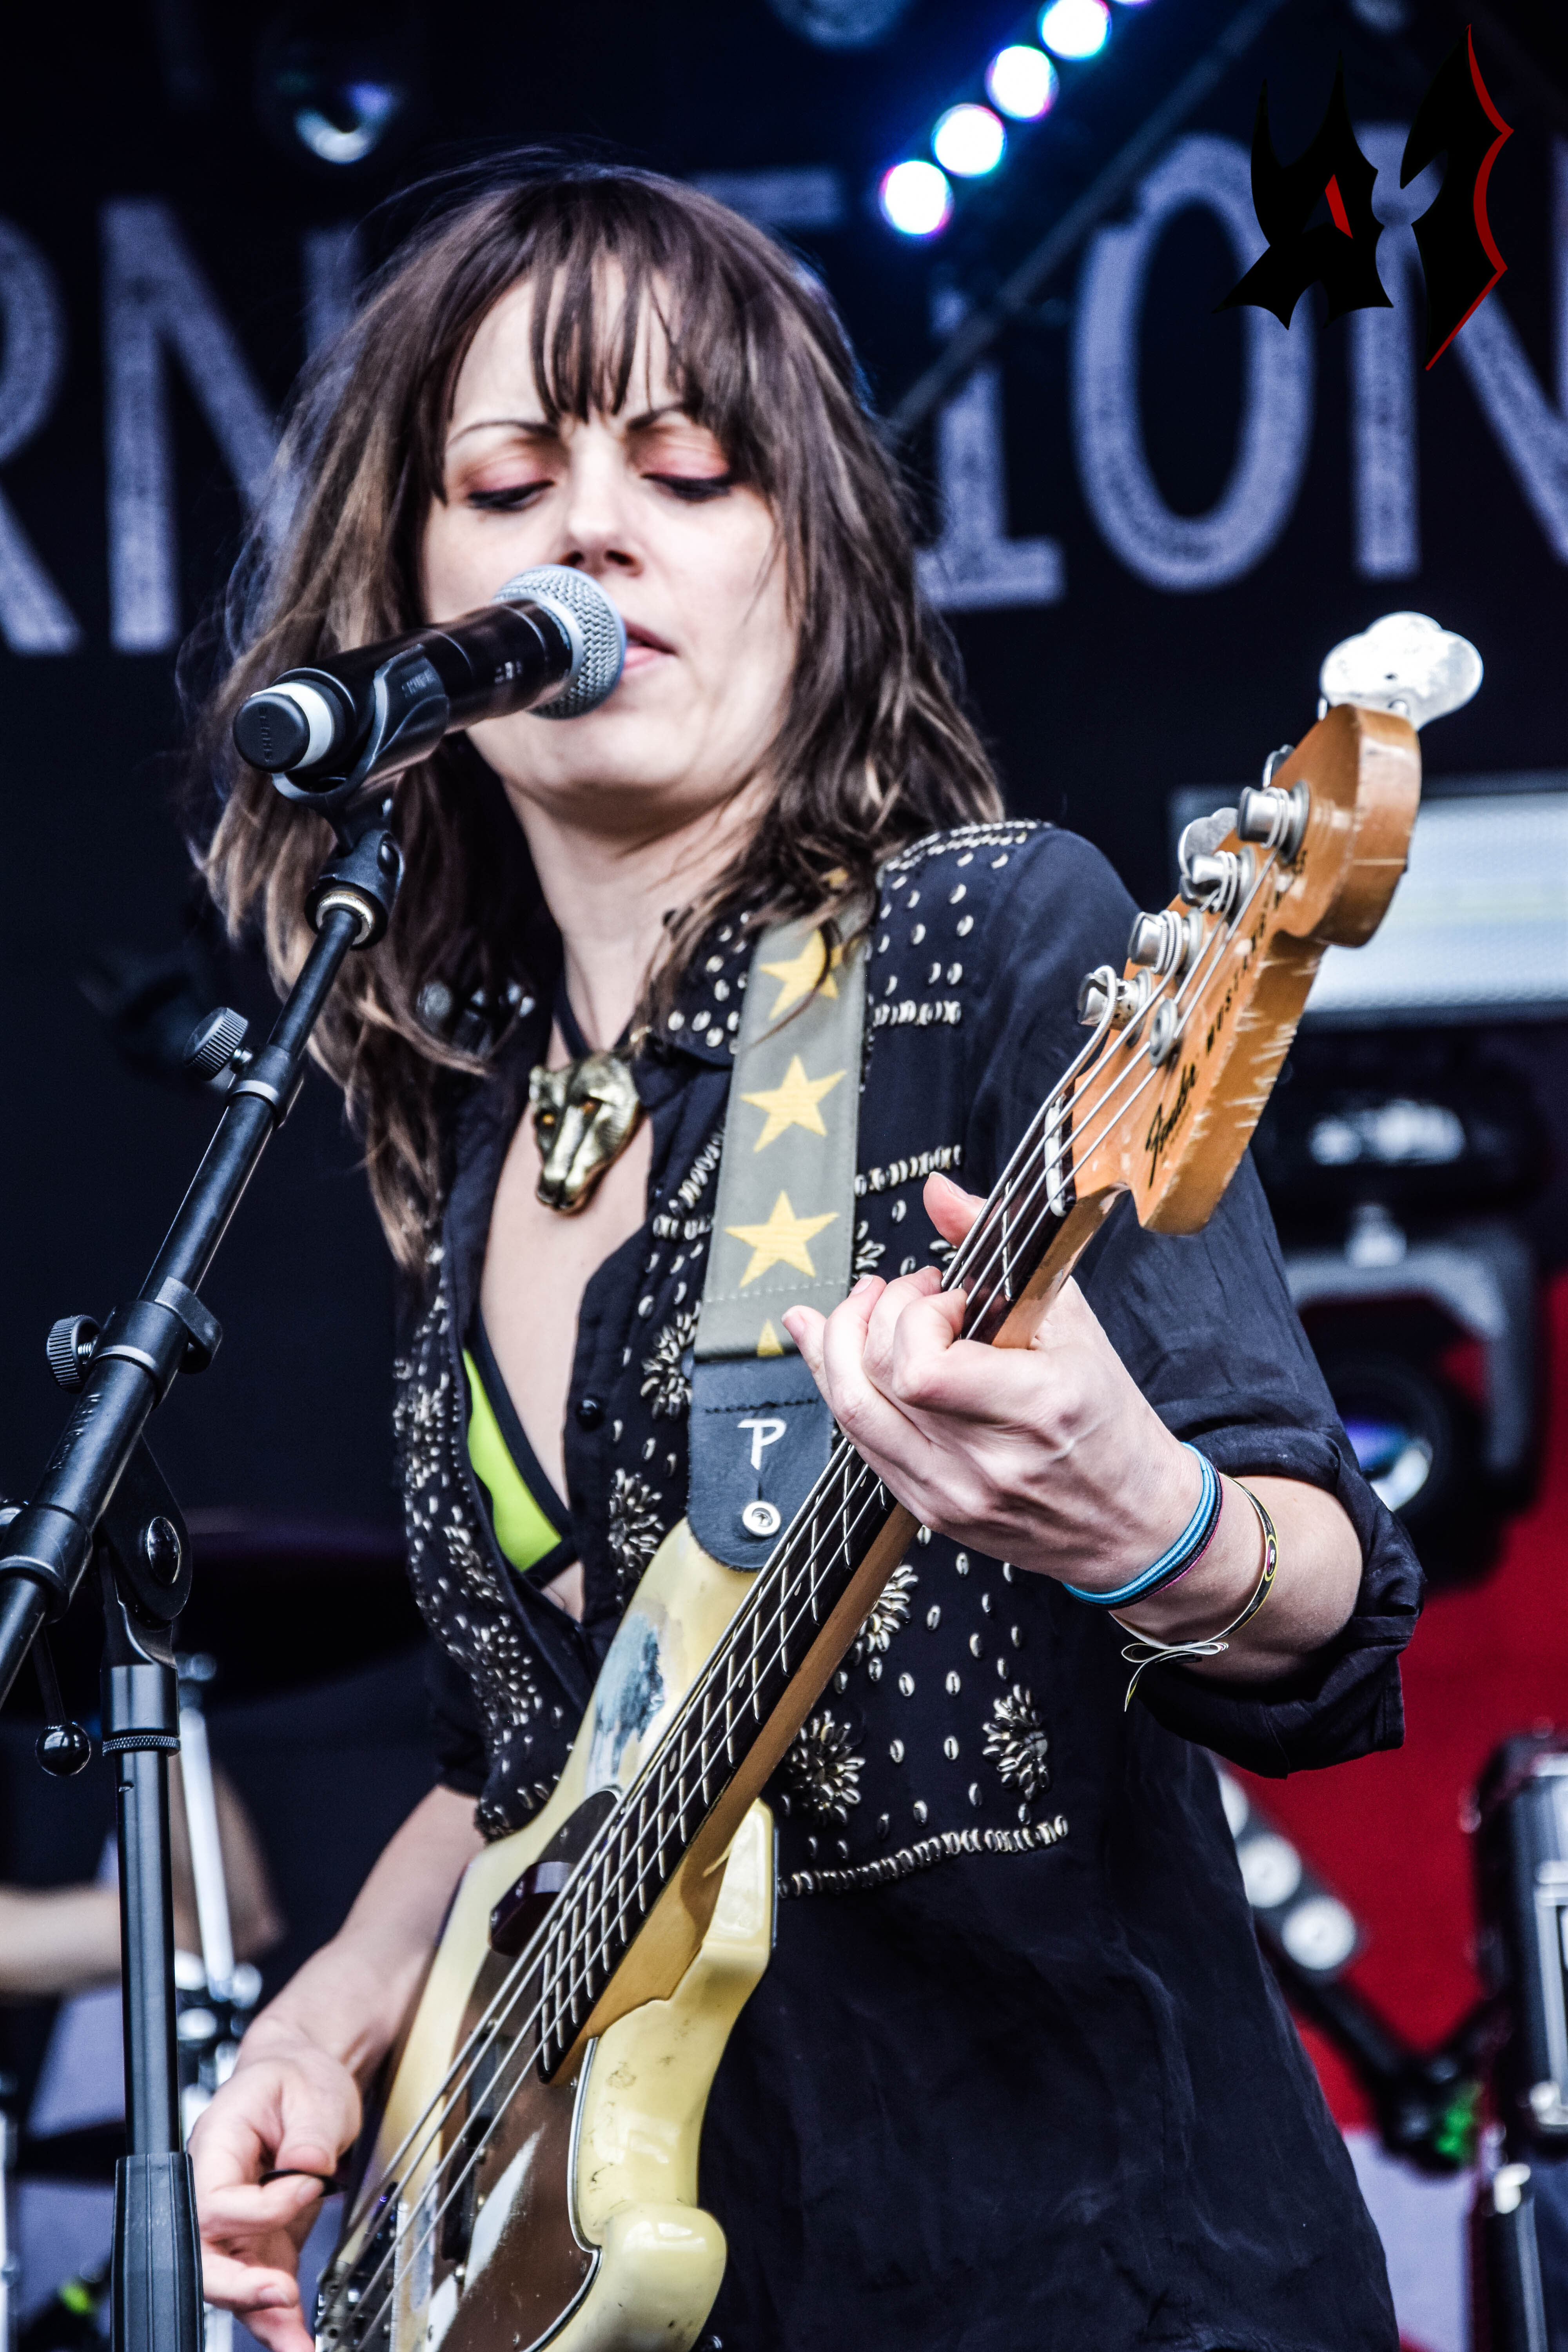 Donwload 2018 – Day 3 - The Last Internationale 7